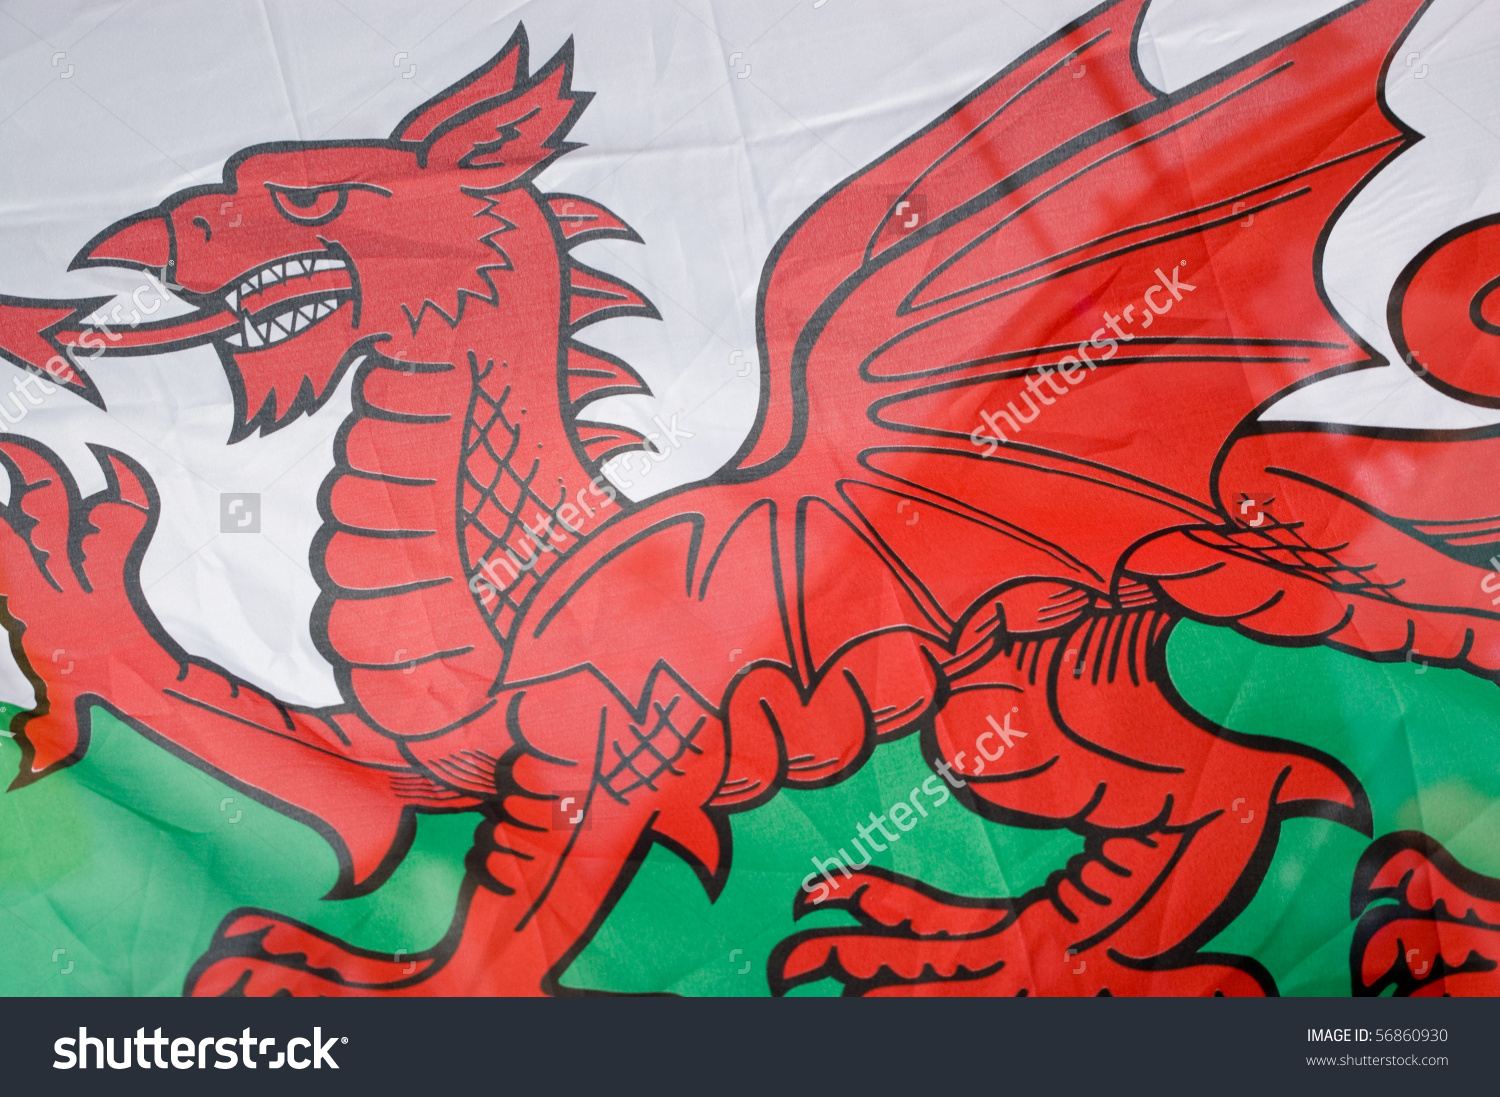 Flag Of Wales Backgrounds, Compatible - PC, Mobile, Gadgets| 1500x1097 px